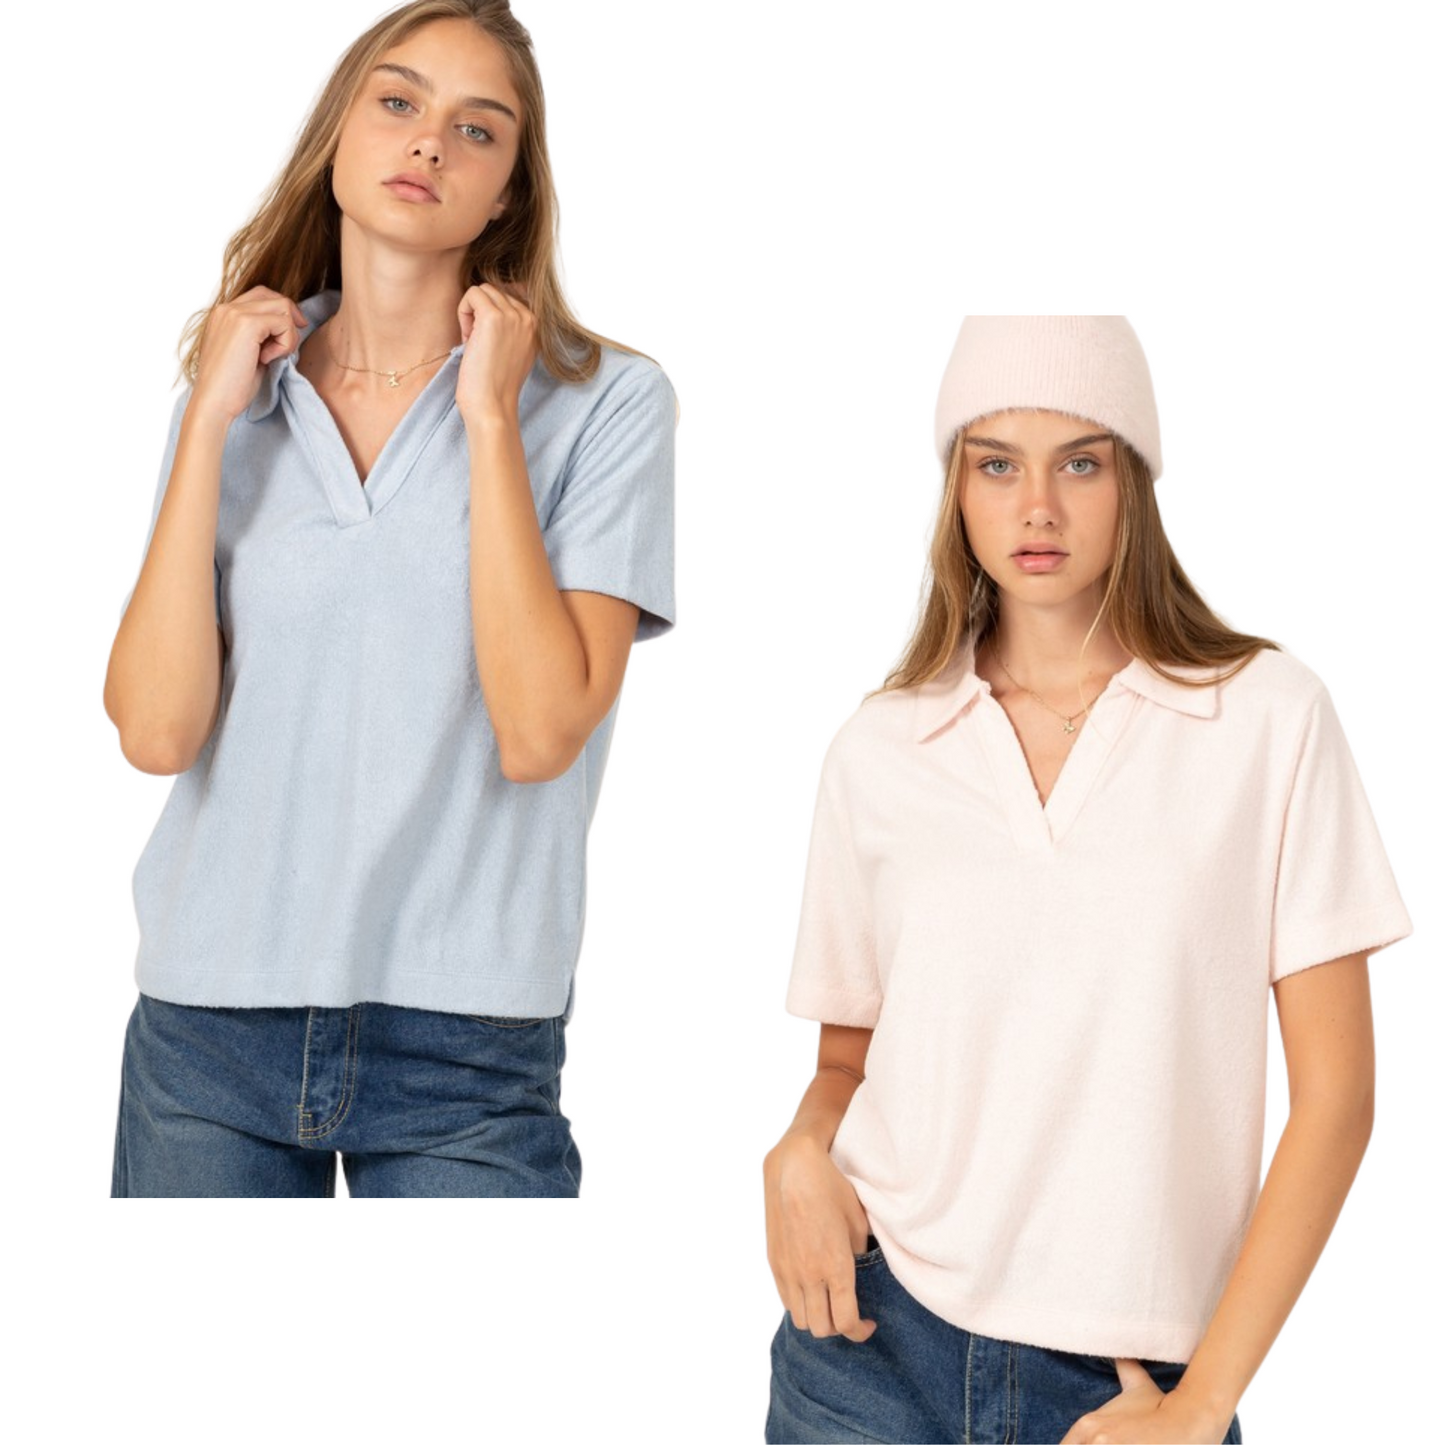 Look stylish in any season with this collared short sleeve top. Featuring a collar and short sleeves for warmth, it boasts a slightly loose fit bodice for a chic appearance. Choose from either dusty blue or pale pink to stay on-trend.